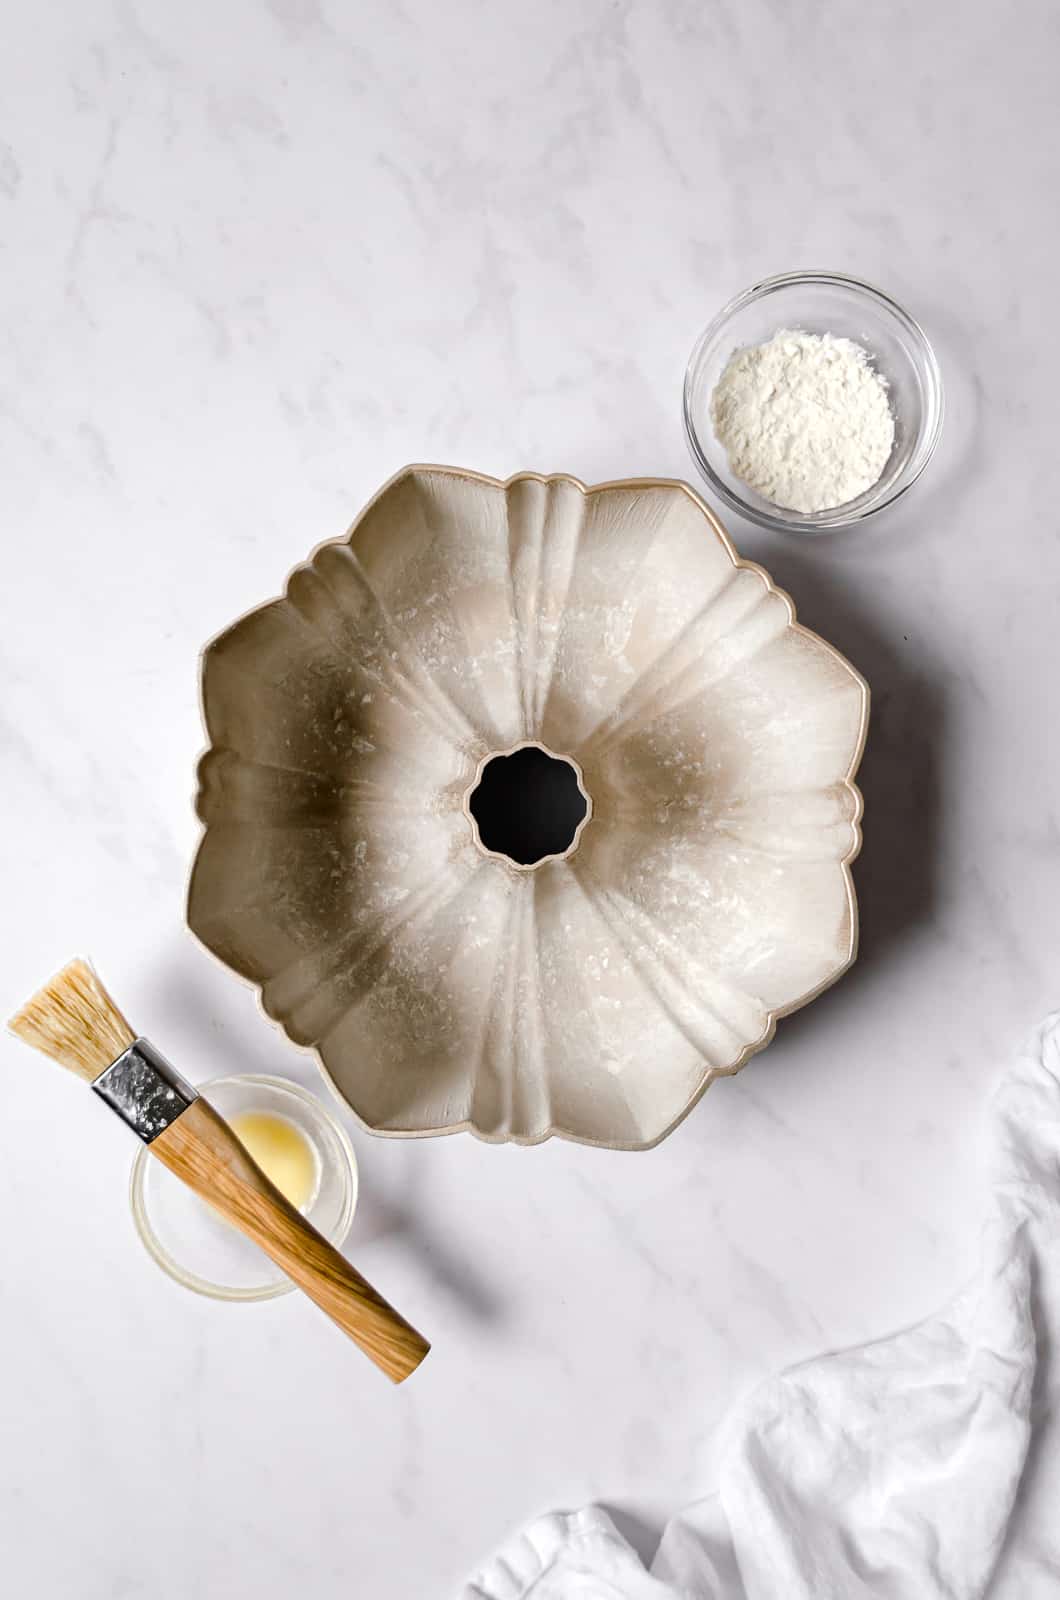 greased and flour dusted bundt pan.